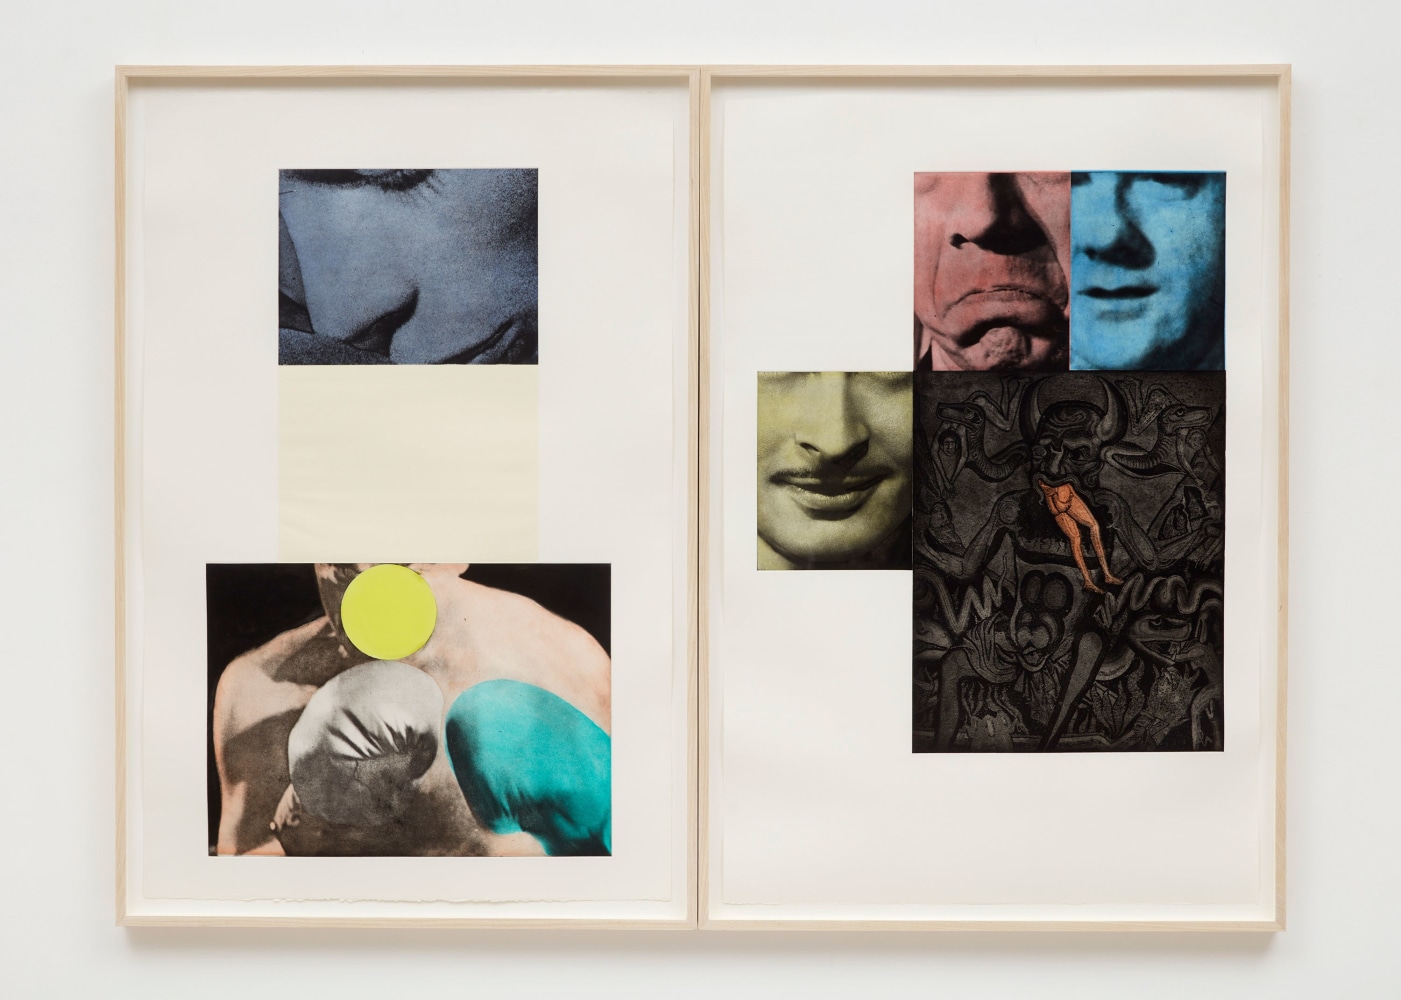 John Baldessari&amp;nbsp;
Heaven and Hell, 1988&amp;nbsp;
2 aquatint, scraping, roulette, and photo-etchings on Rives BFK paper
47 1/4 x 31 1/2 inches (120 x 80 cm), each&amp;nbsp;
Edition of 45 + proofs&amp;nbsp;
Printed by Peter Kneub&amp;uuml;hler, Zurich&amp;nbsp;
Published by Peter Blum Edition, New York&amp;nbsp;